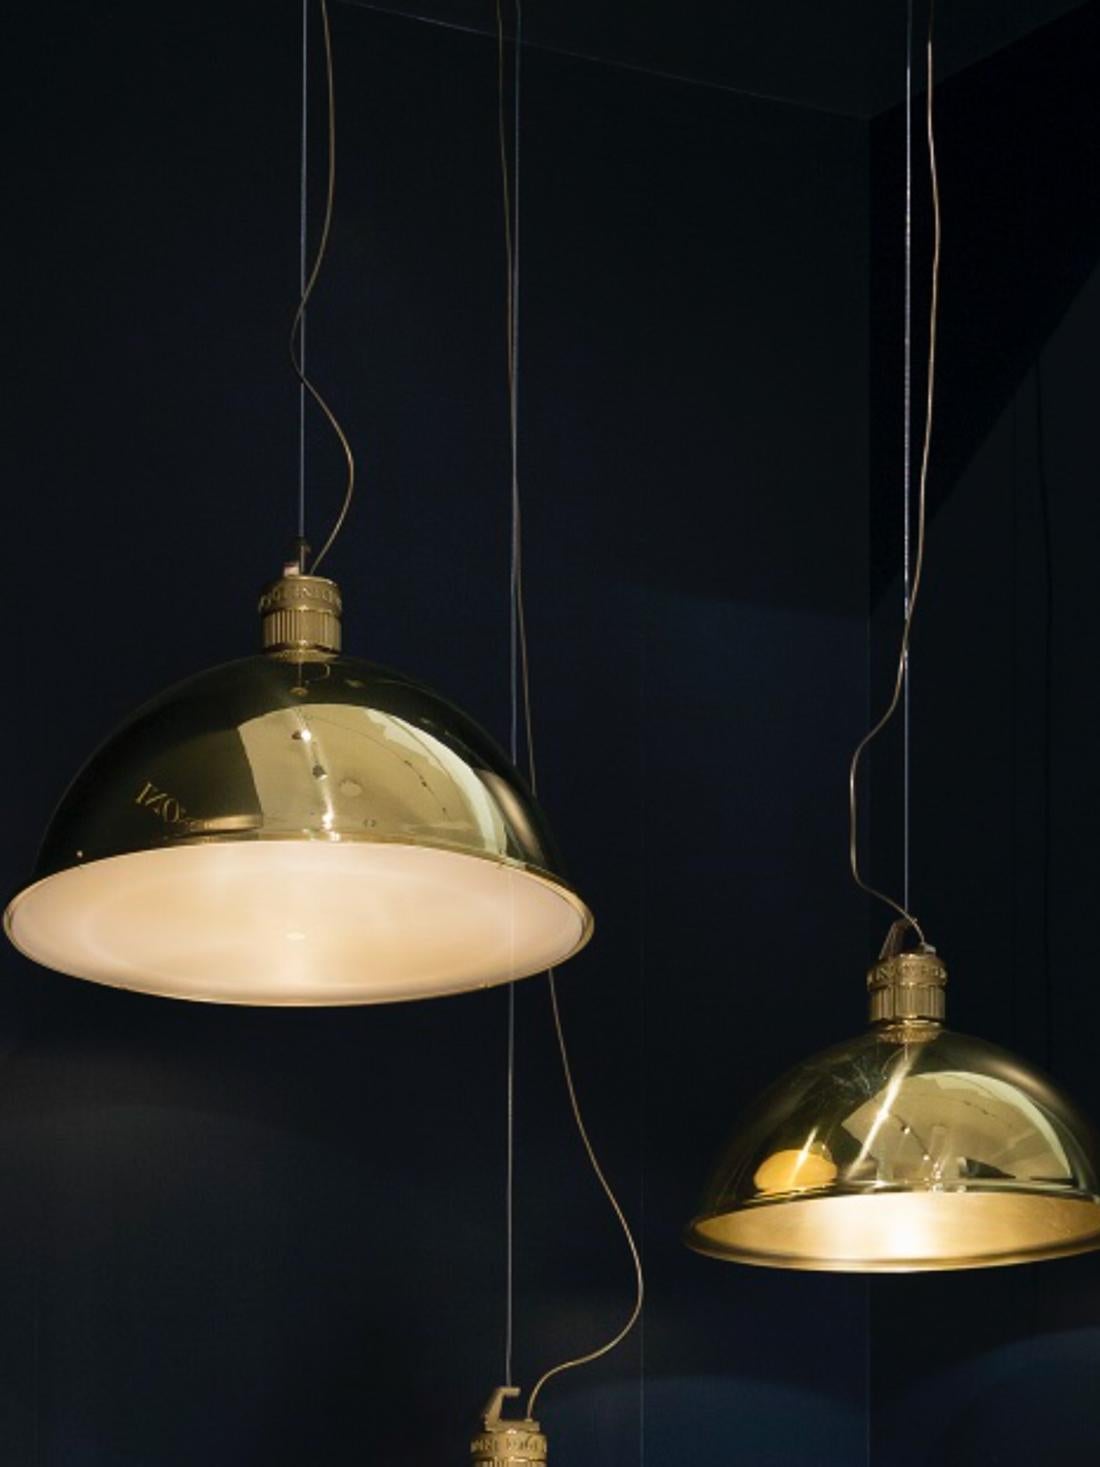 This beautiful Ghidini 1961 contemporary suspension lamp is designed by the Italian designer Elisa Giovannoni and it is the result of the meeting between the highest Italian quality manufacturing in brass and the iconic international design.
The